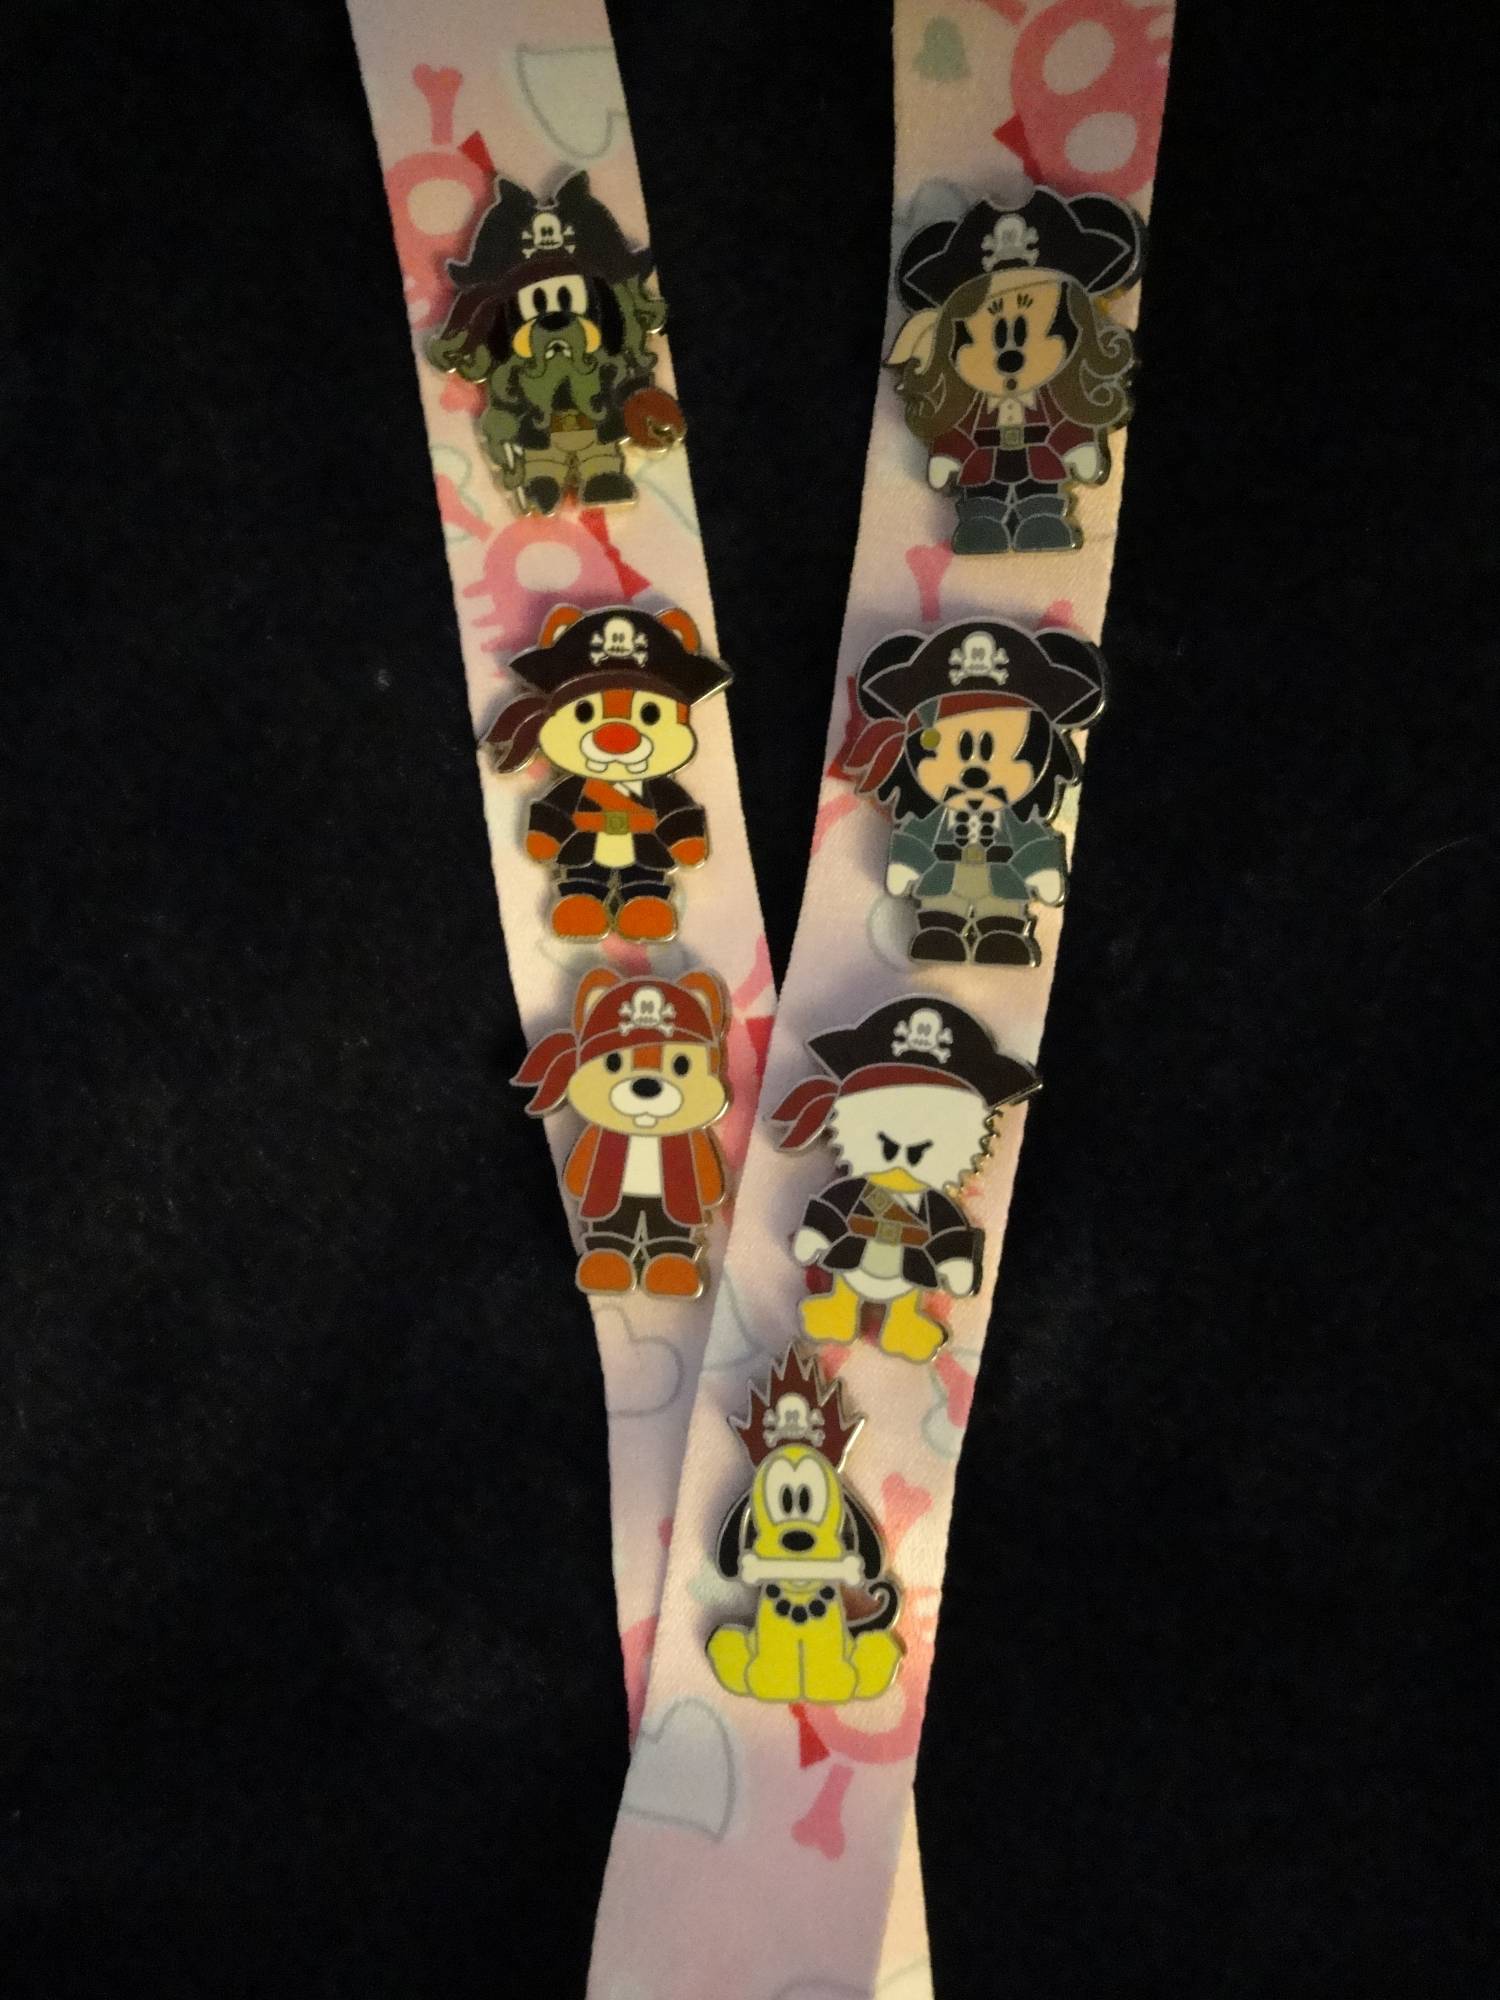 Learn all about Pin Trading at Disney! | PassPorter.com